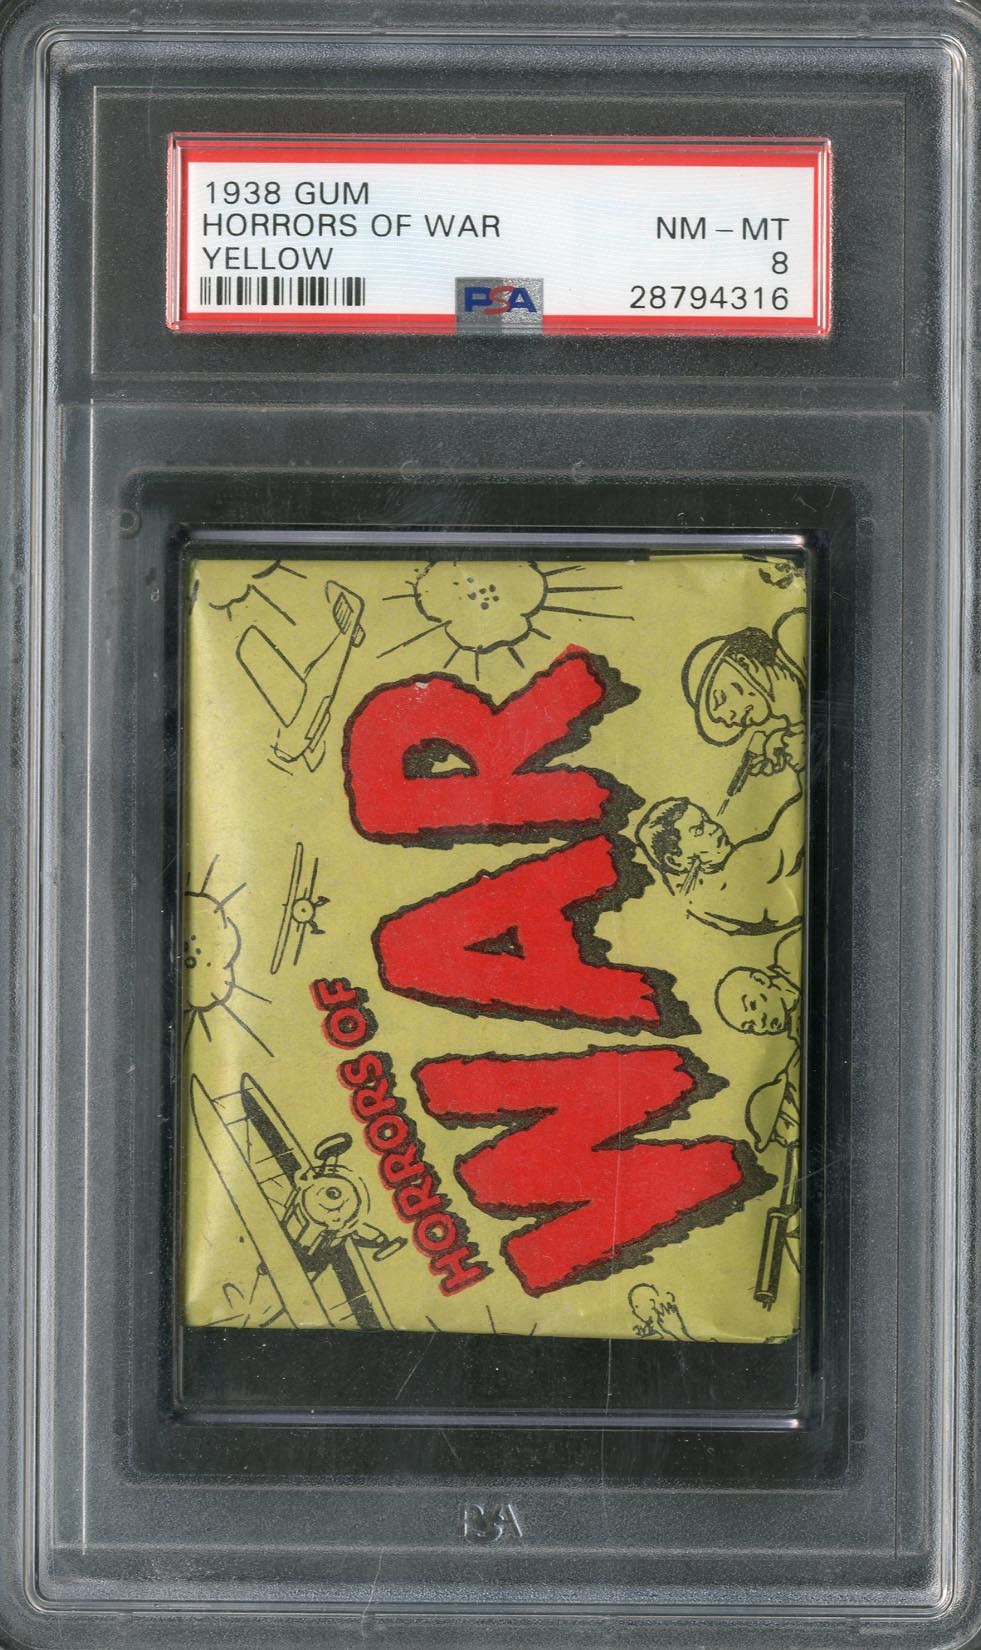 Unopened Wax Packs Boxes and Cases - 1938 Gum Inc. Horrors of War Unopened Wax Pack (PSA 8, only one higher)